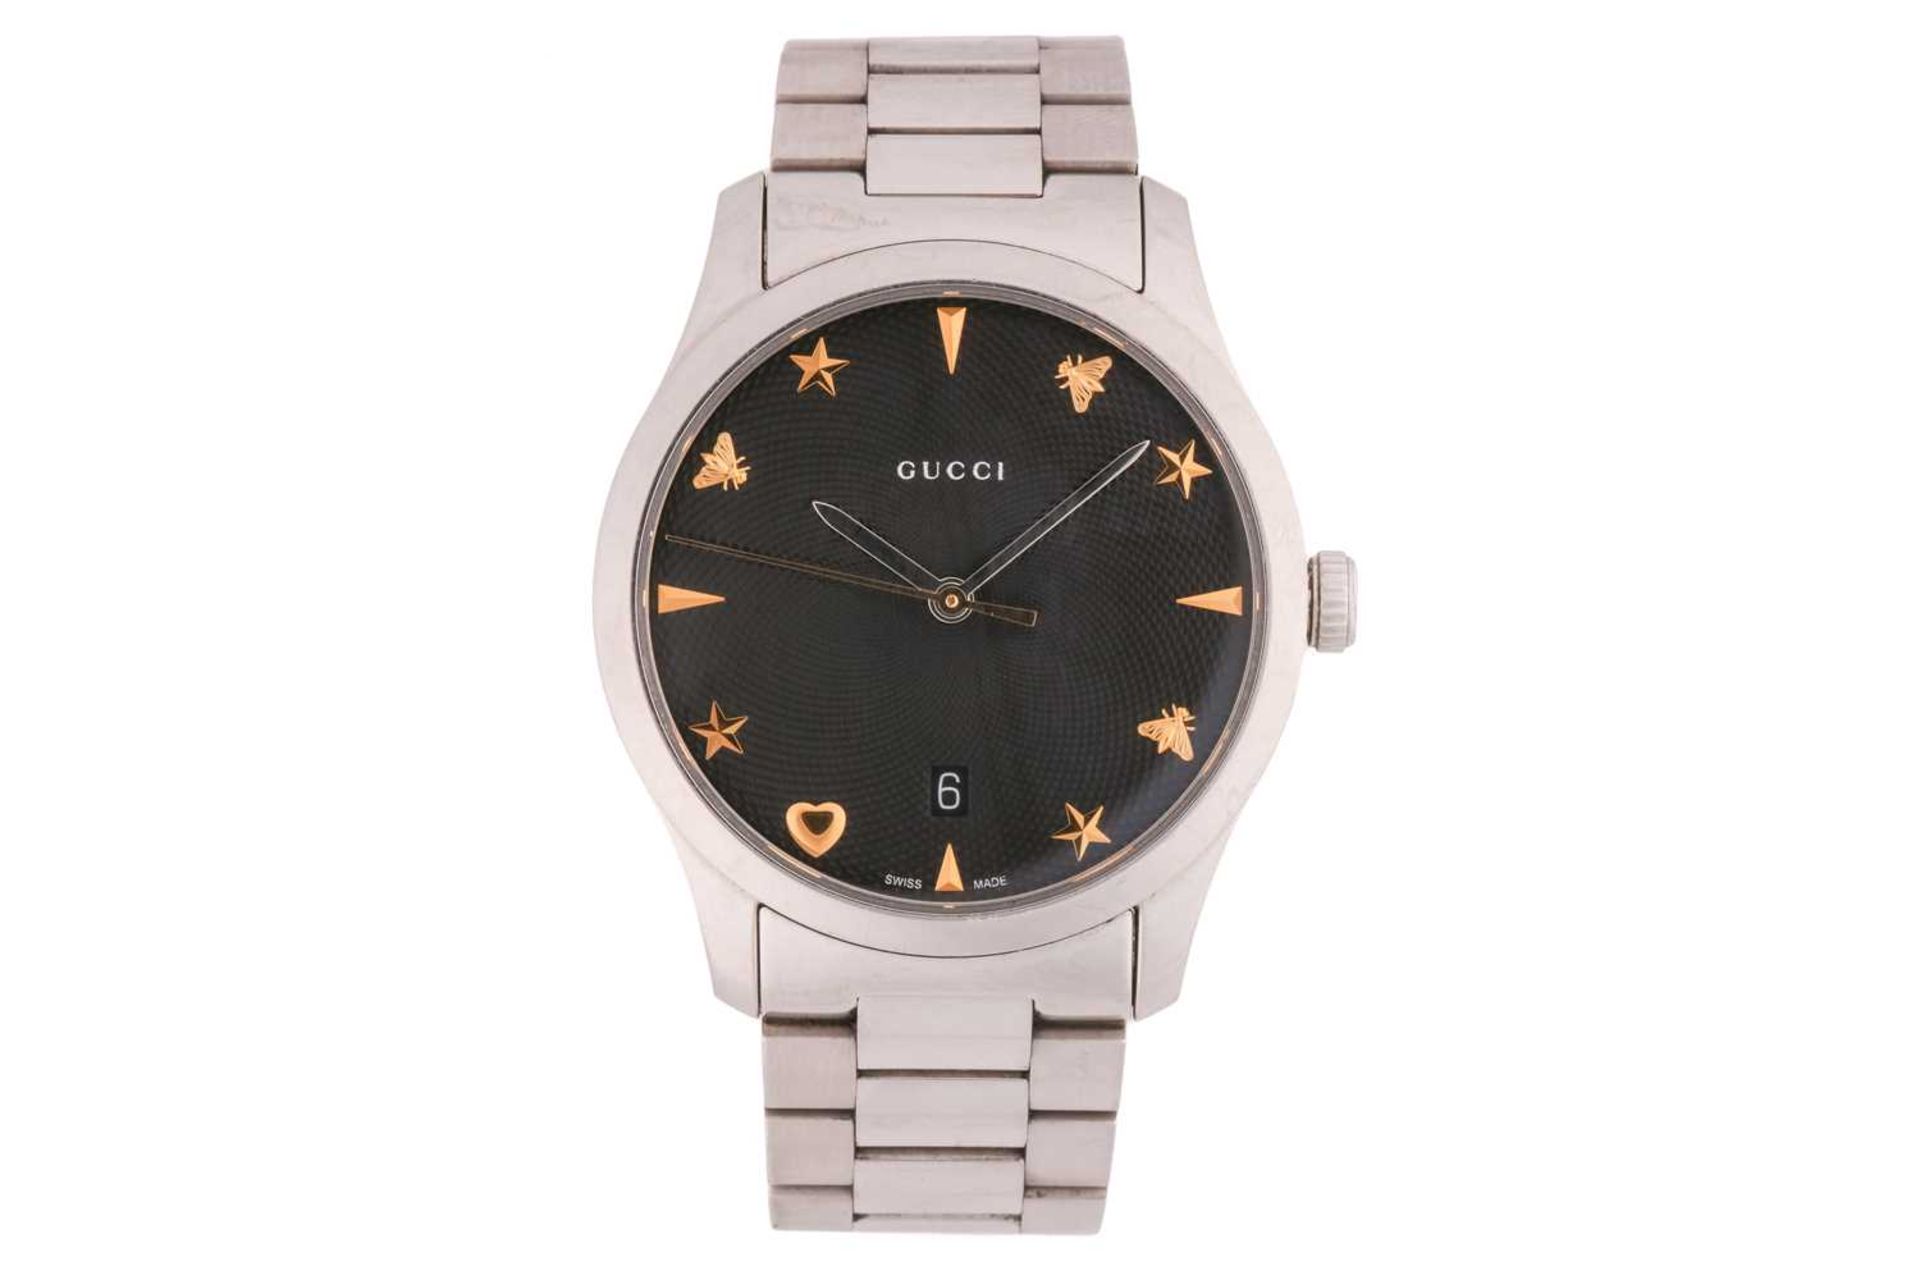 A Gucci 126.4 gents wristwatch, featuring a swiss made quartz movement in a steel case measuring